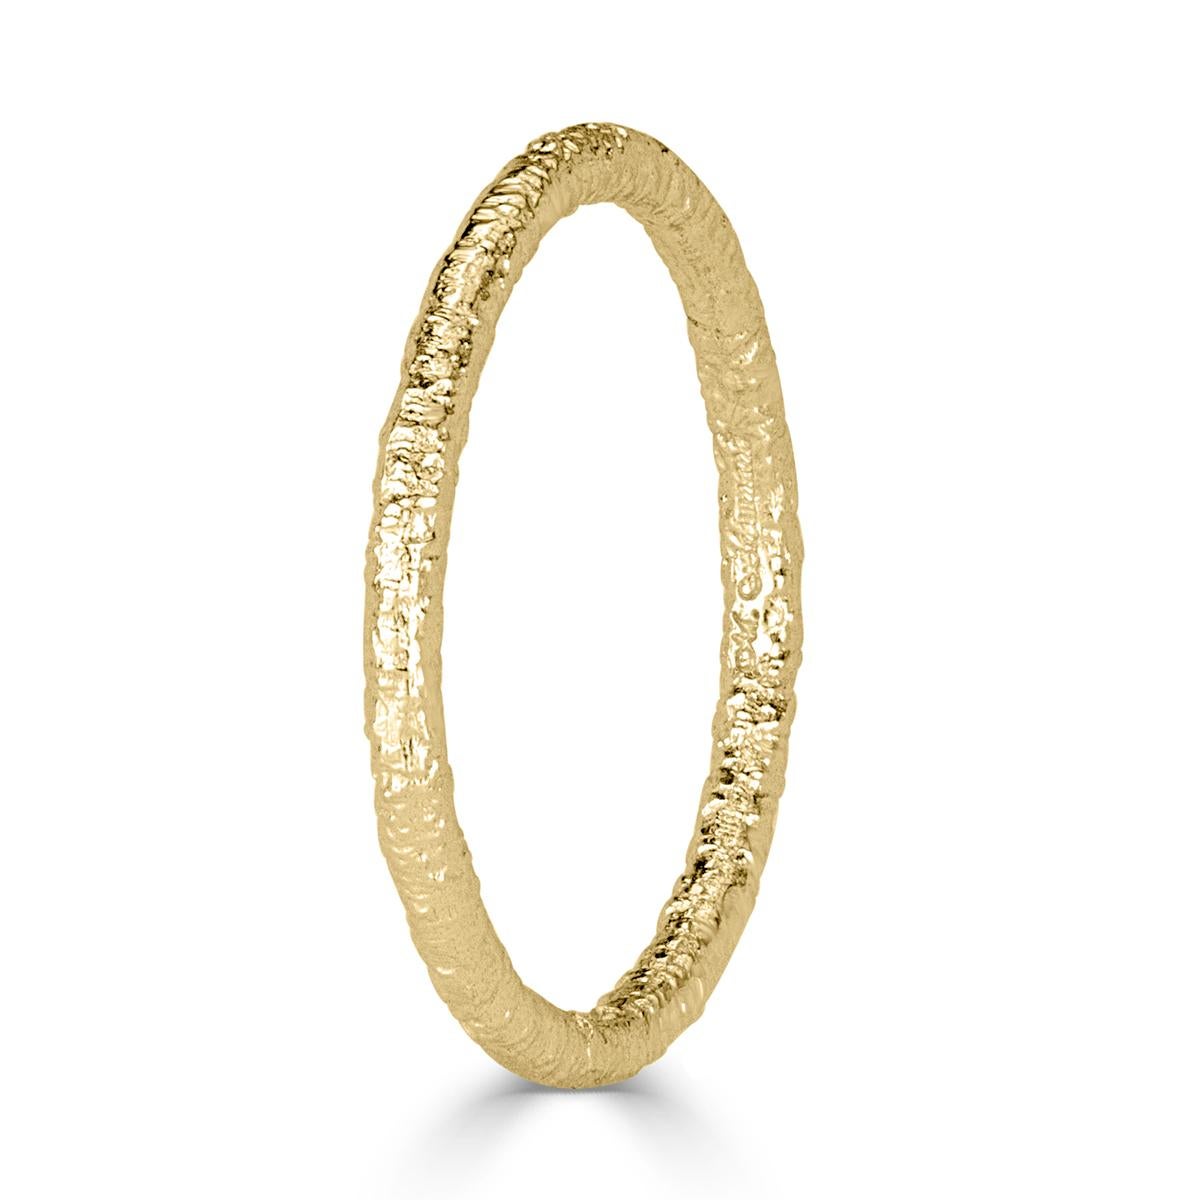 Custom created in 18k yellow gold, this lovely band features a ravishing textured design which looks stunning in a stack or as a stand alone piece.
